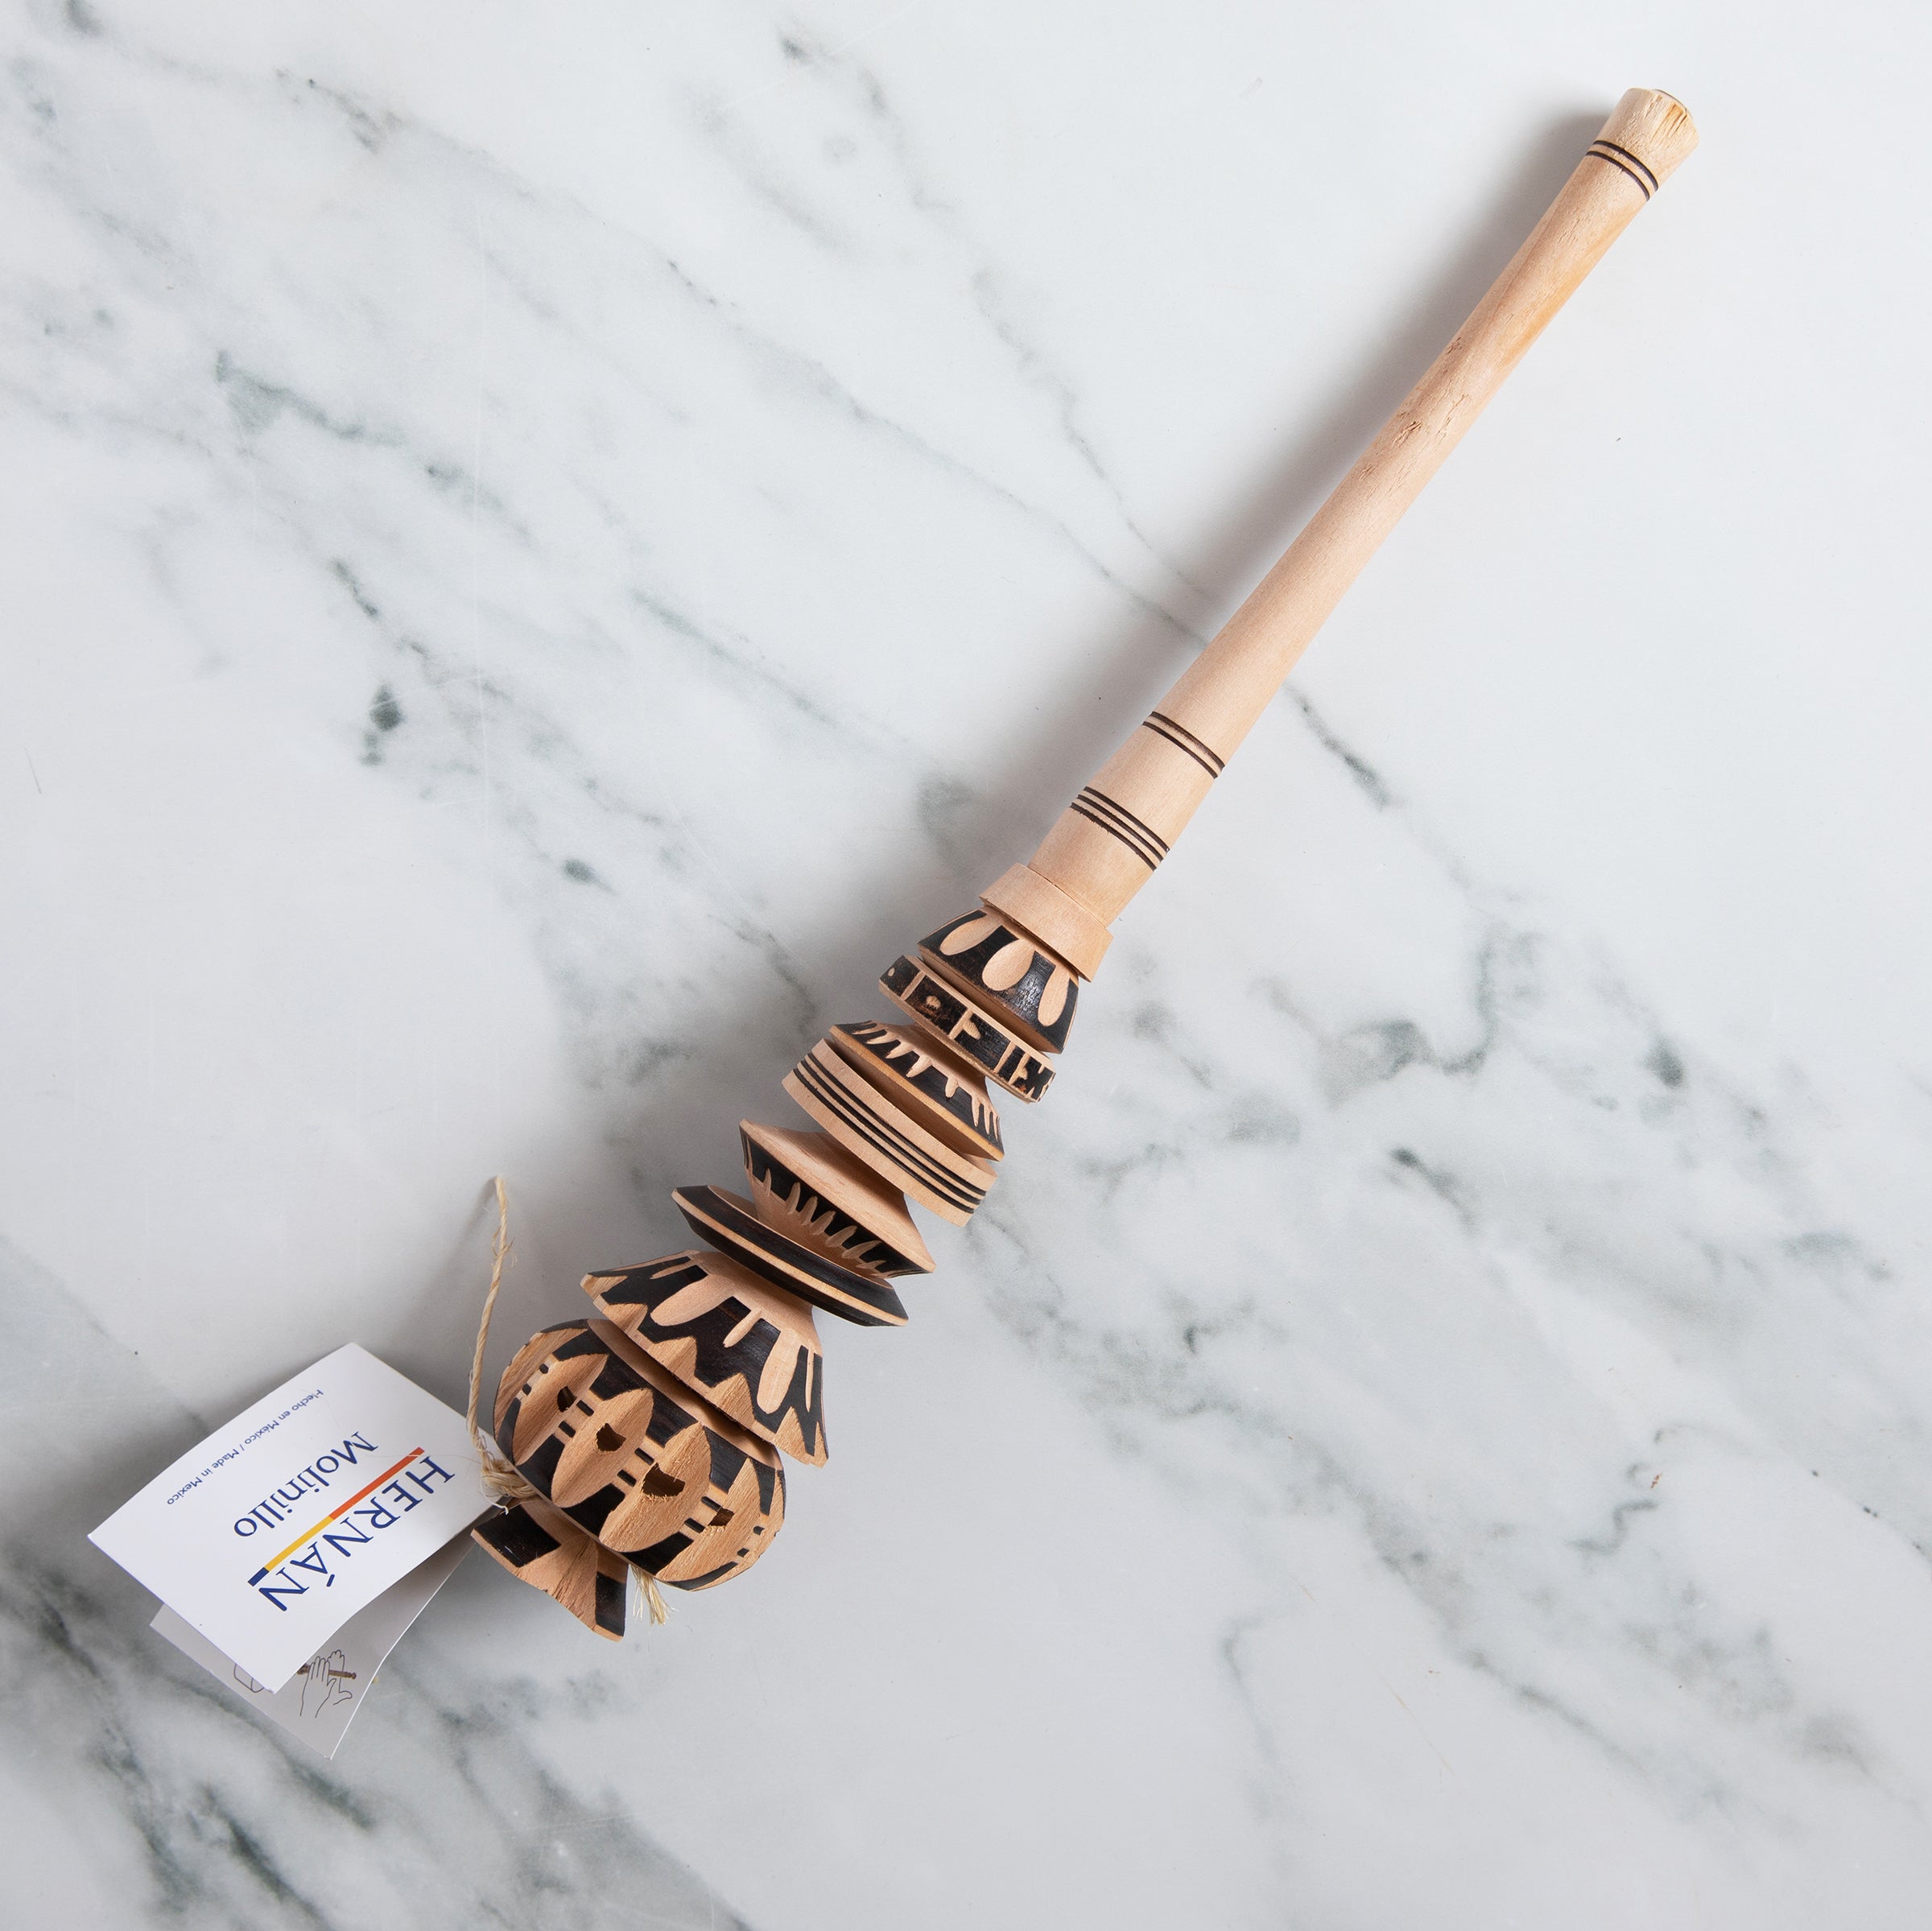 Wooden Whisk Stirrer Molinillo Mexican Chocolate Cocoa Mixer Stirrer  Frother New